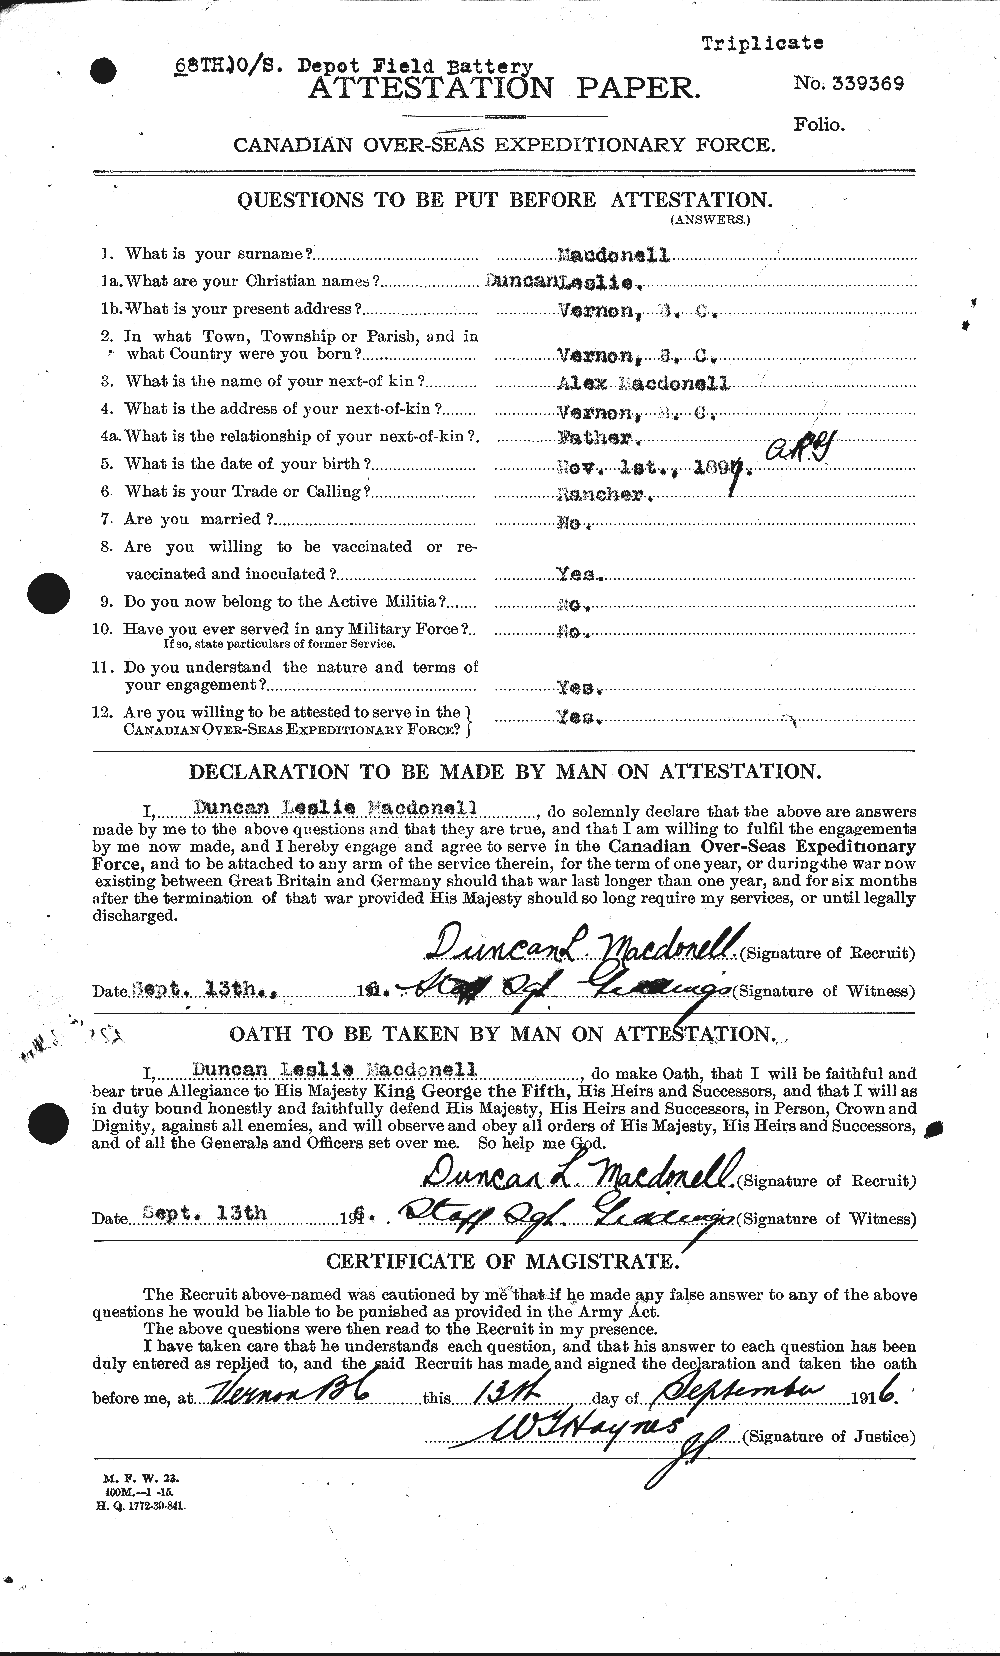 Personnel Records of the First World War - CEF 521432a